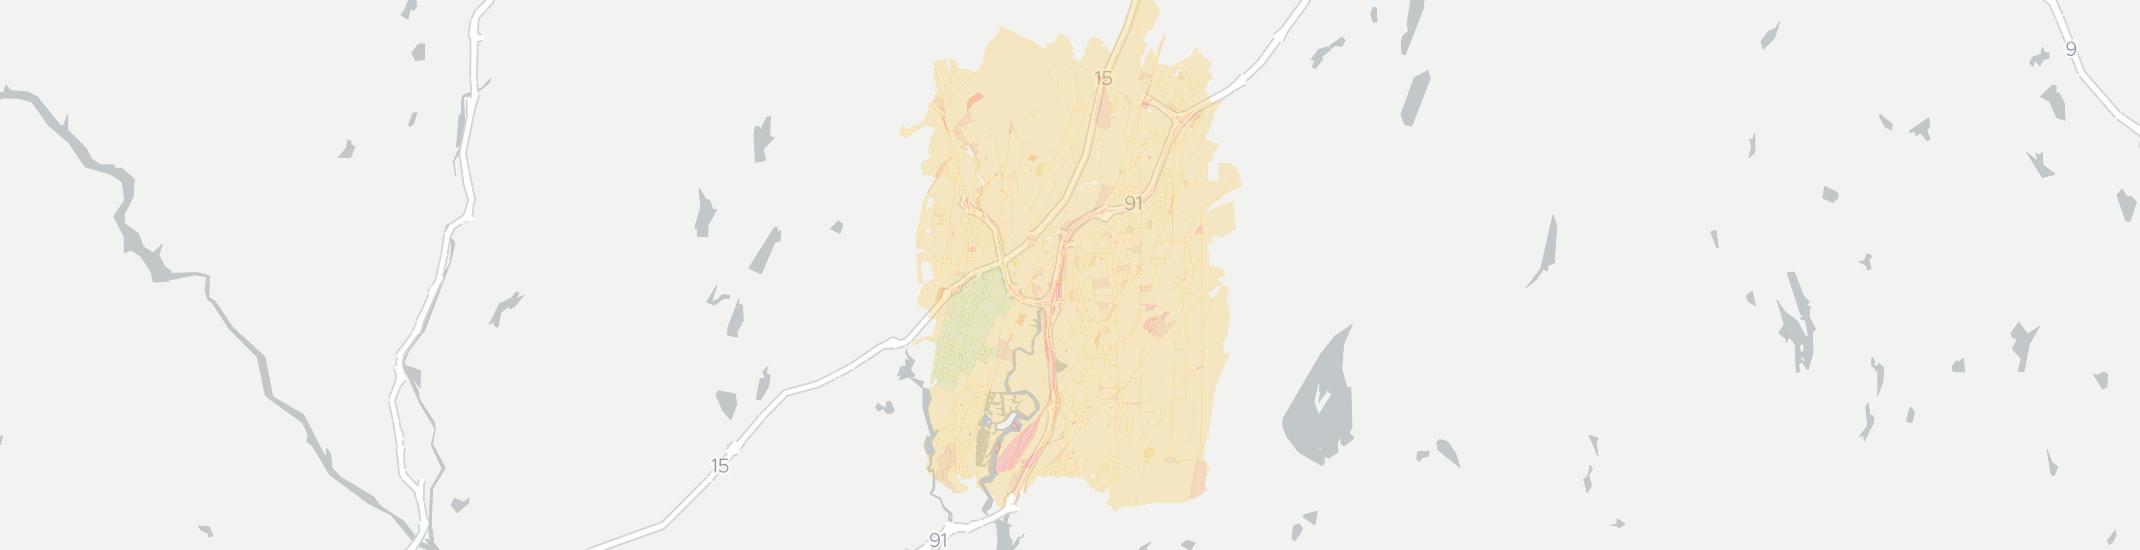 North Haven Internet Competition Map. Click for interactive map.